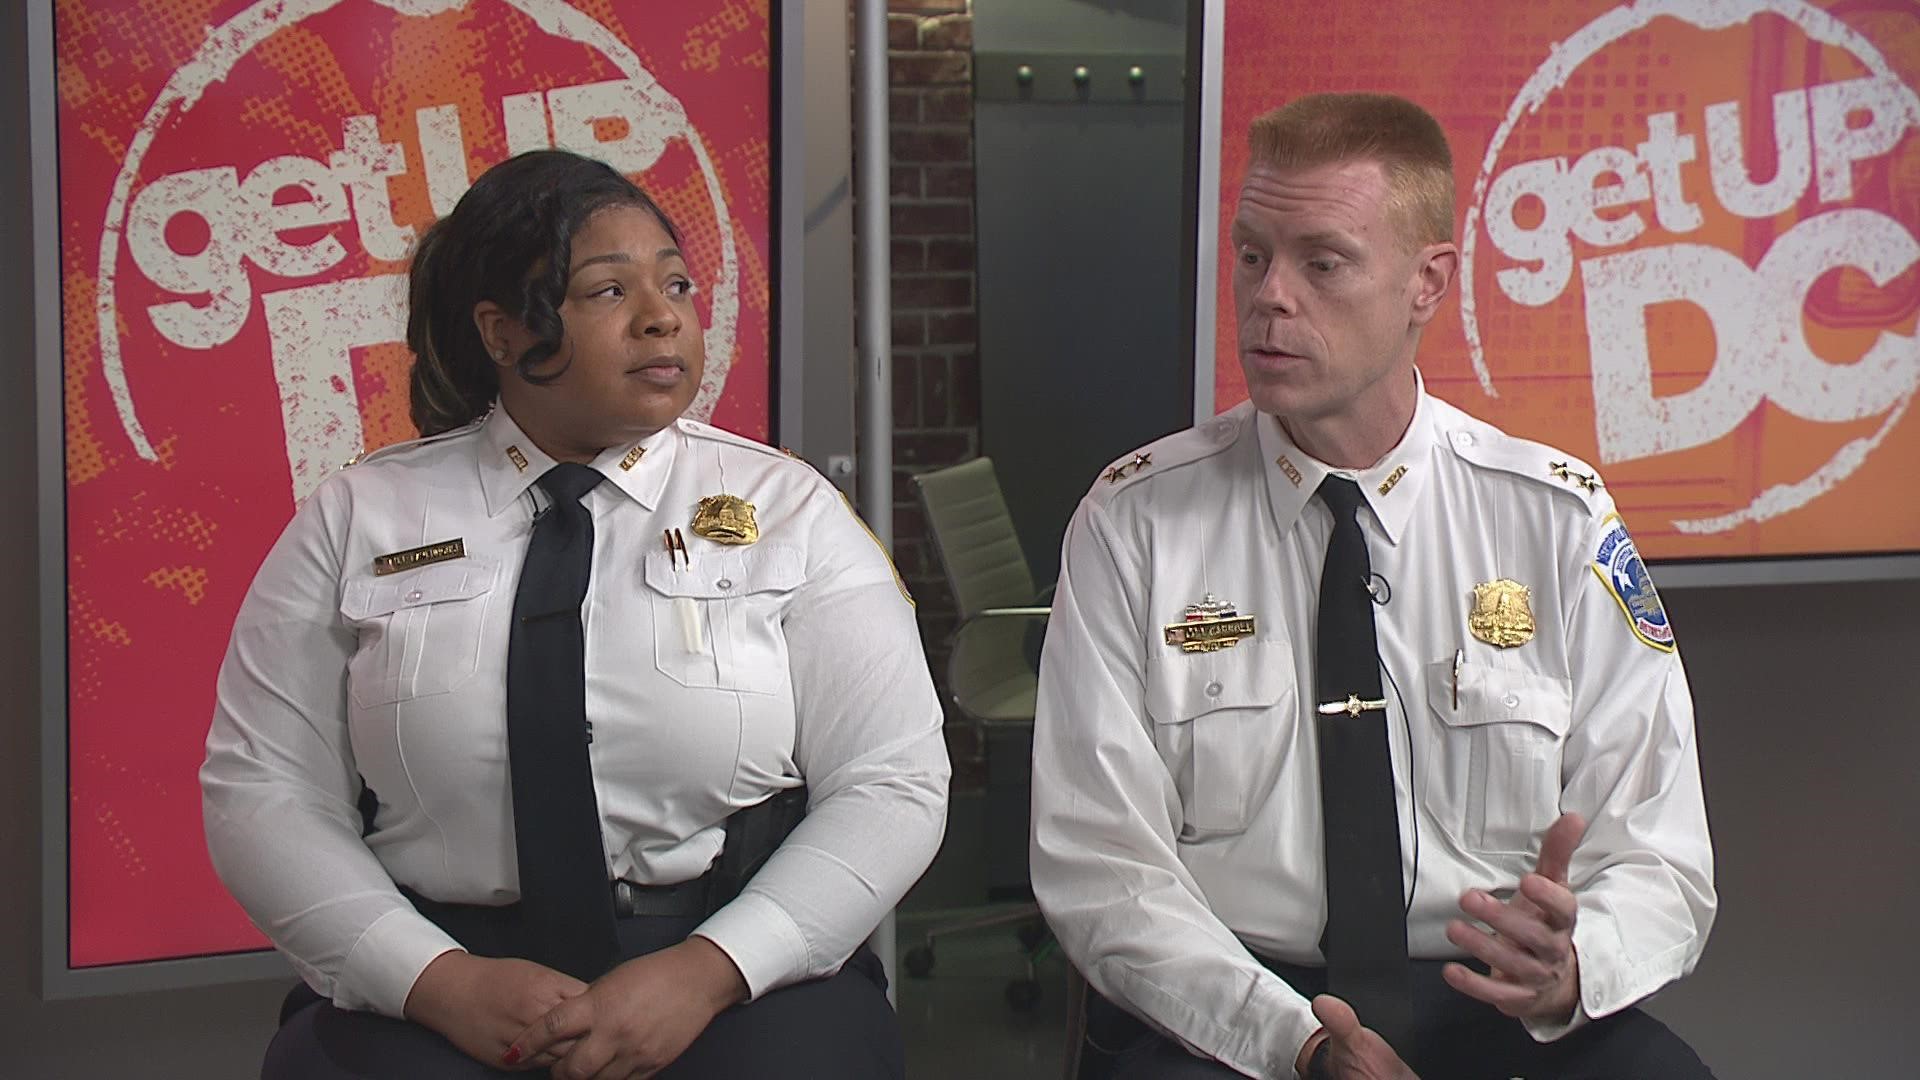 Assistant Chief Jeffery Carroll and Captain Nikki Lavenhouse from D.C.'s Metropolitan Police Department joined WUSA9 to offer ways to stay safe over the NYE holiday.